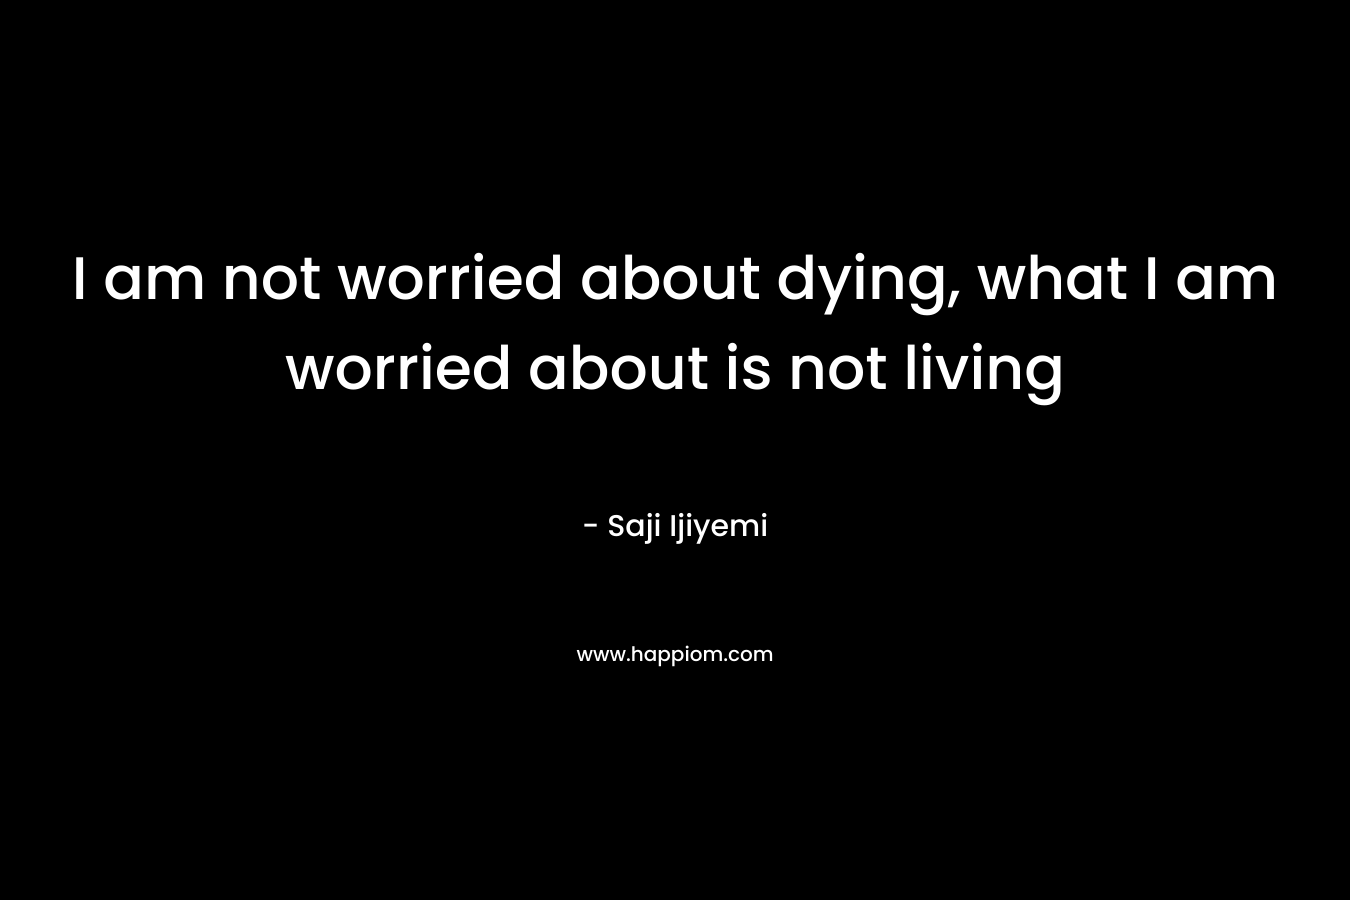 I am not worried about dying, what I am worried about is not living